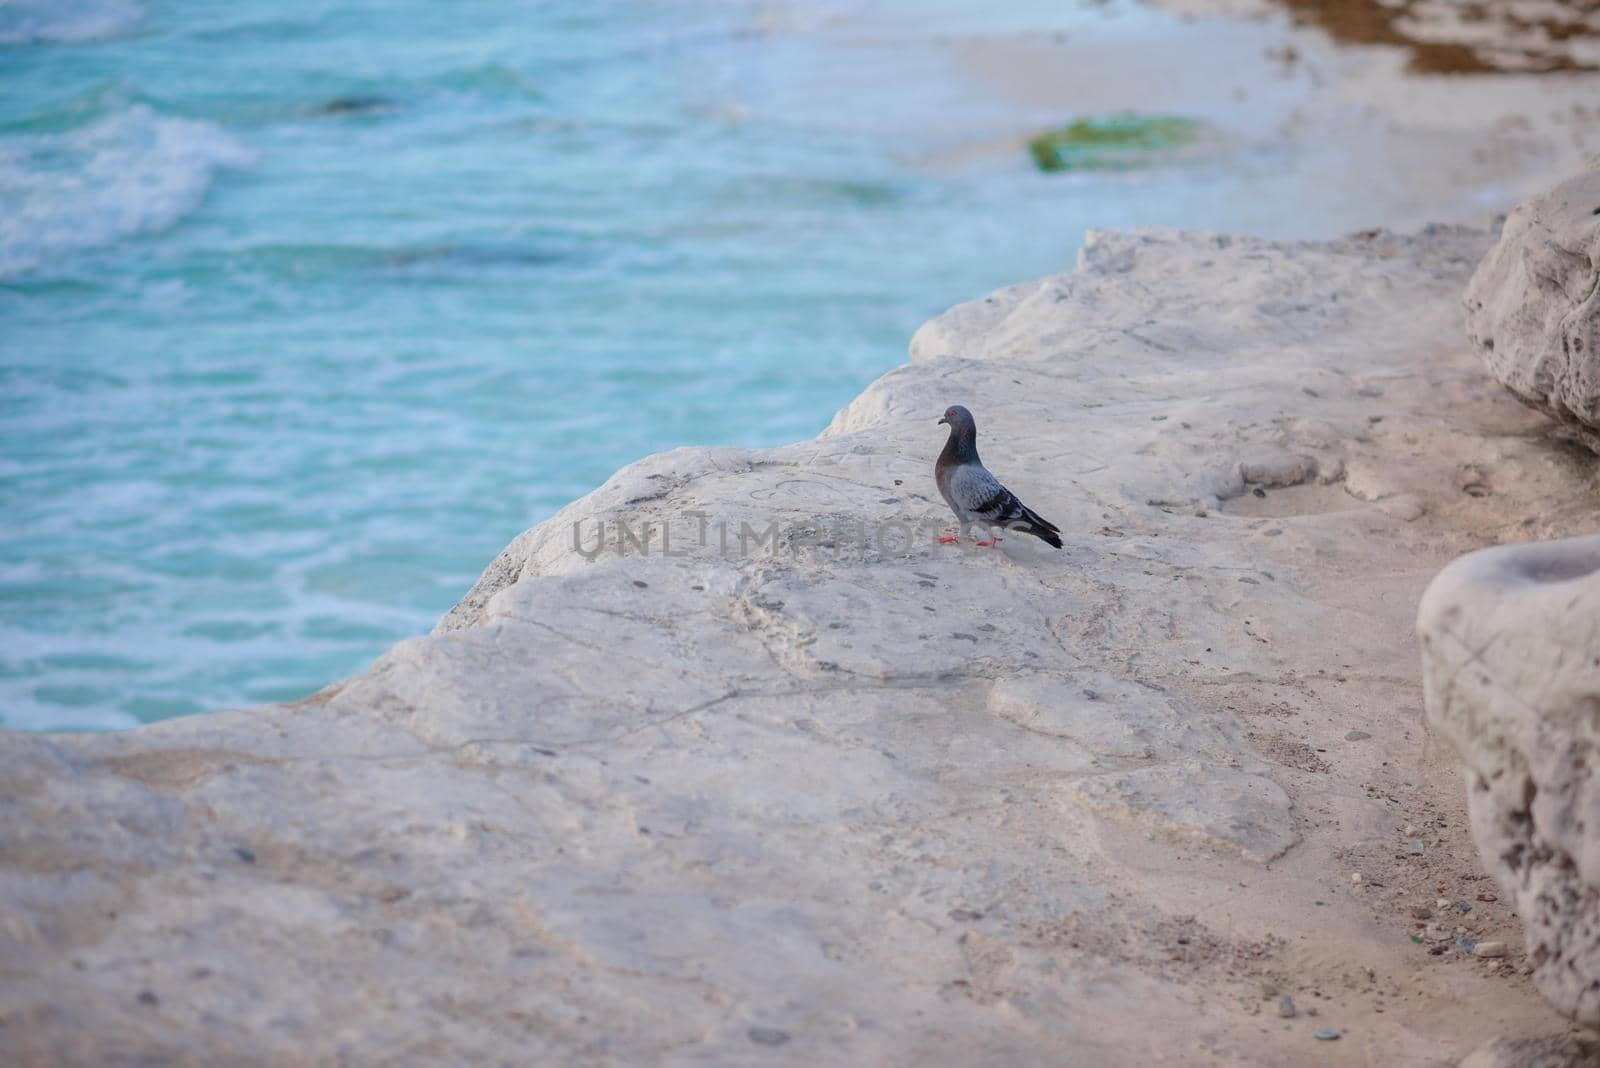 Pigeon on a white rock by the sea. Mexico.